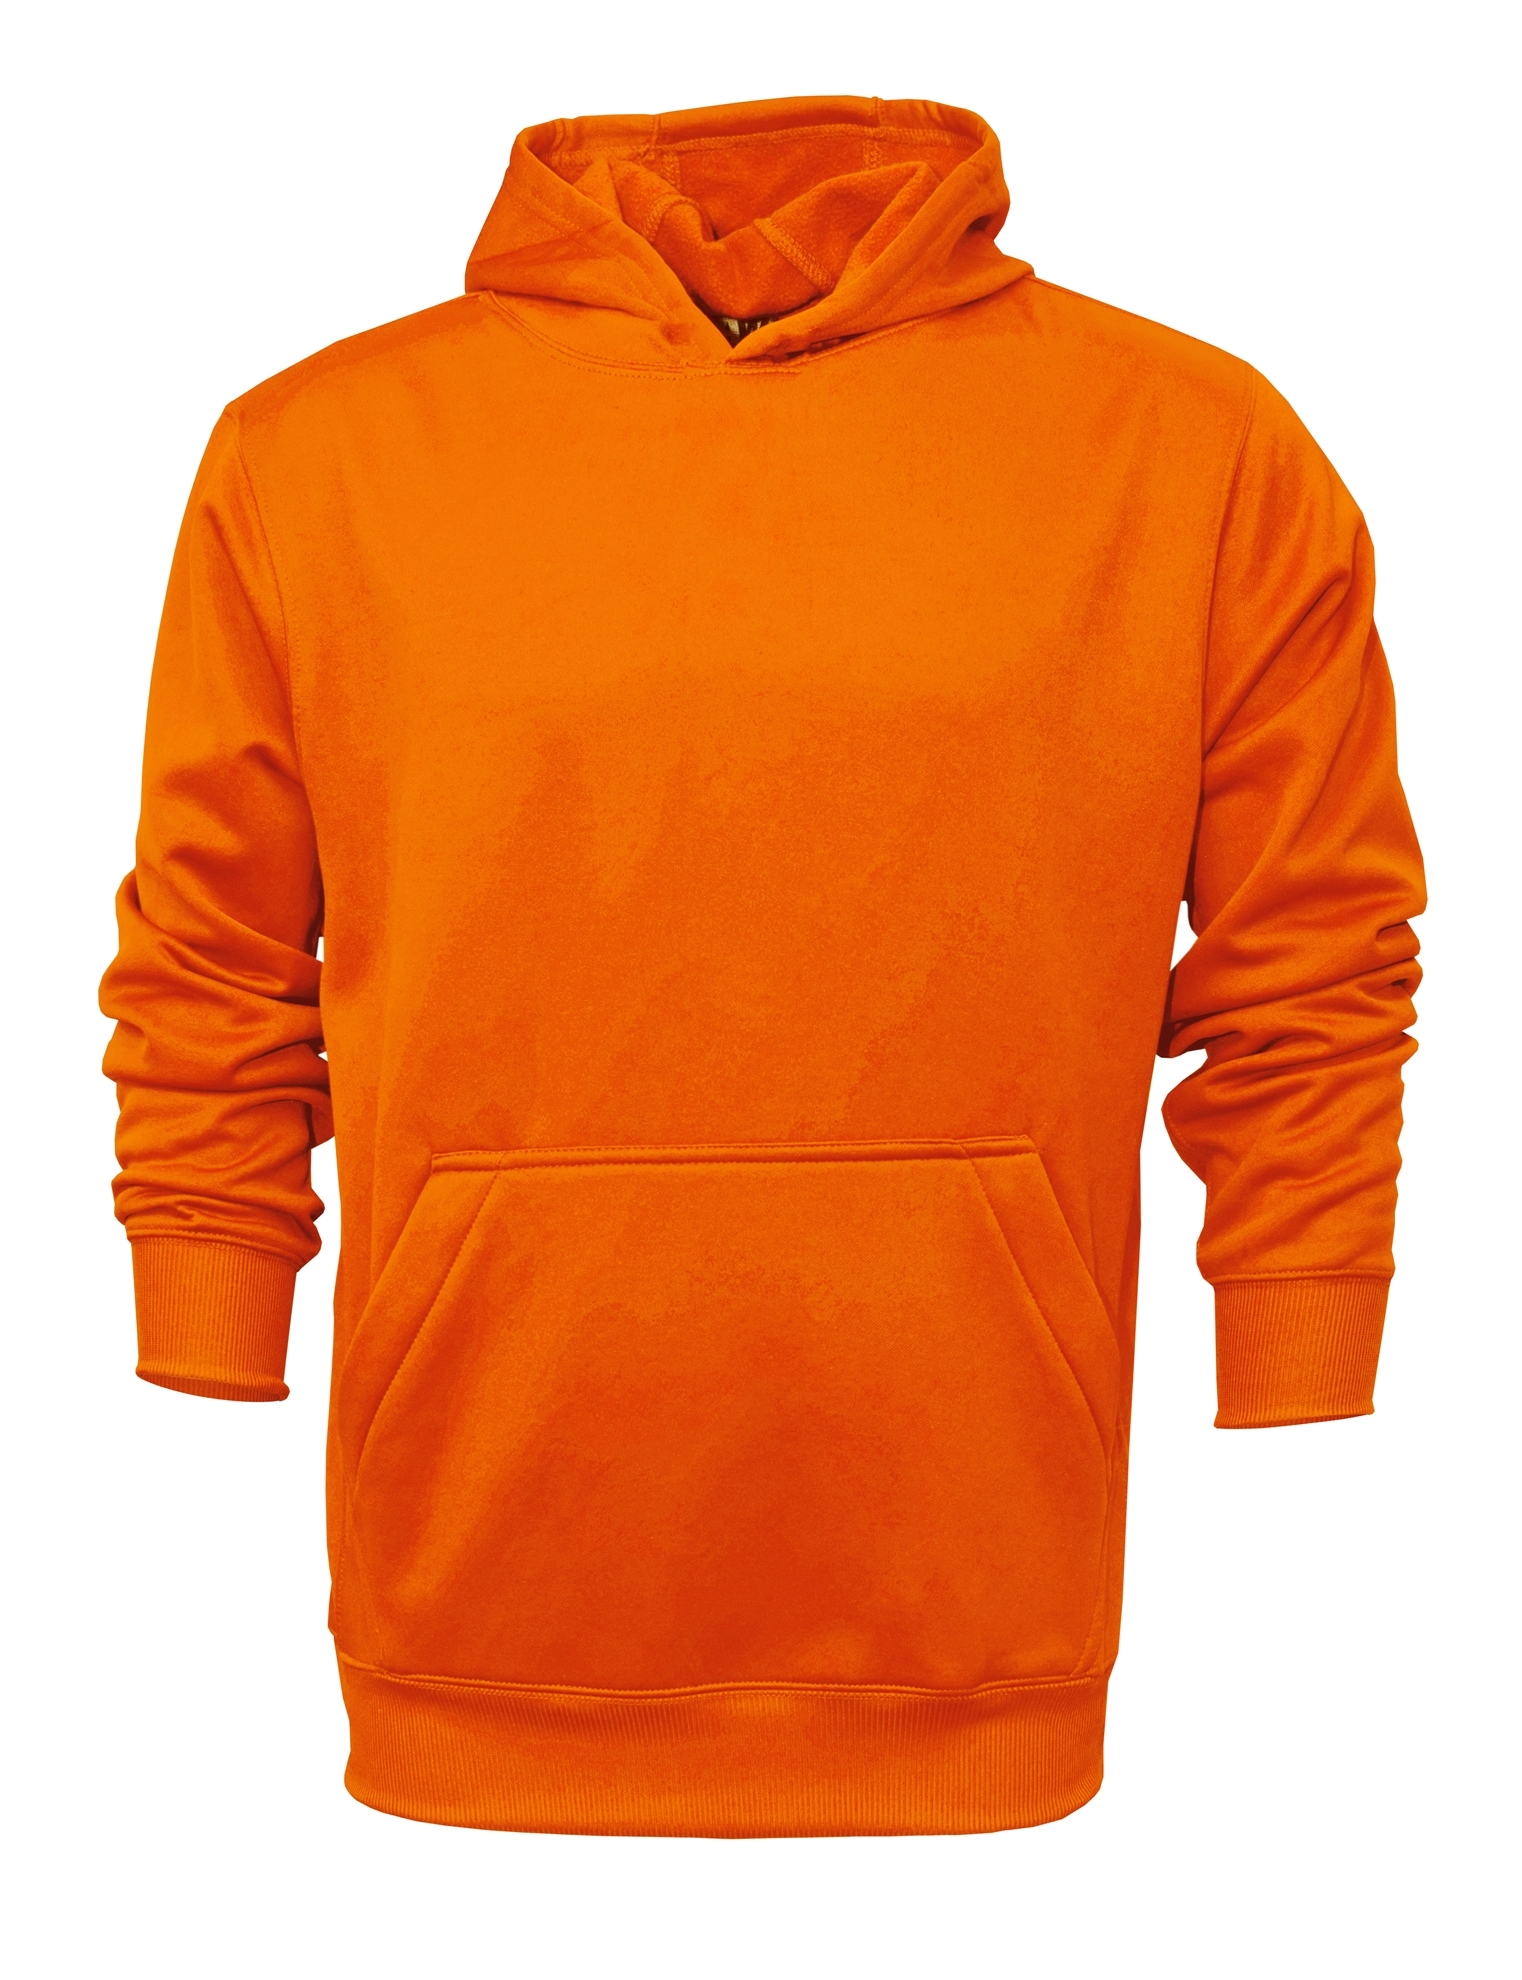 click to view SAFETY ORANGE